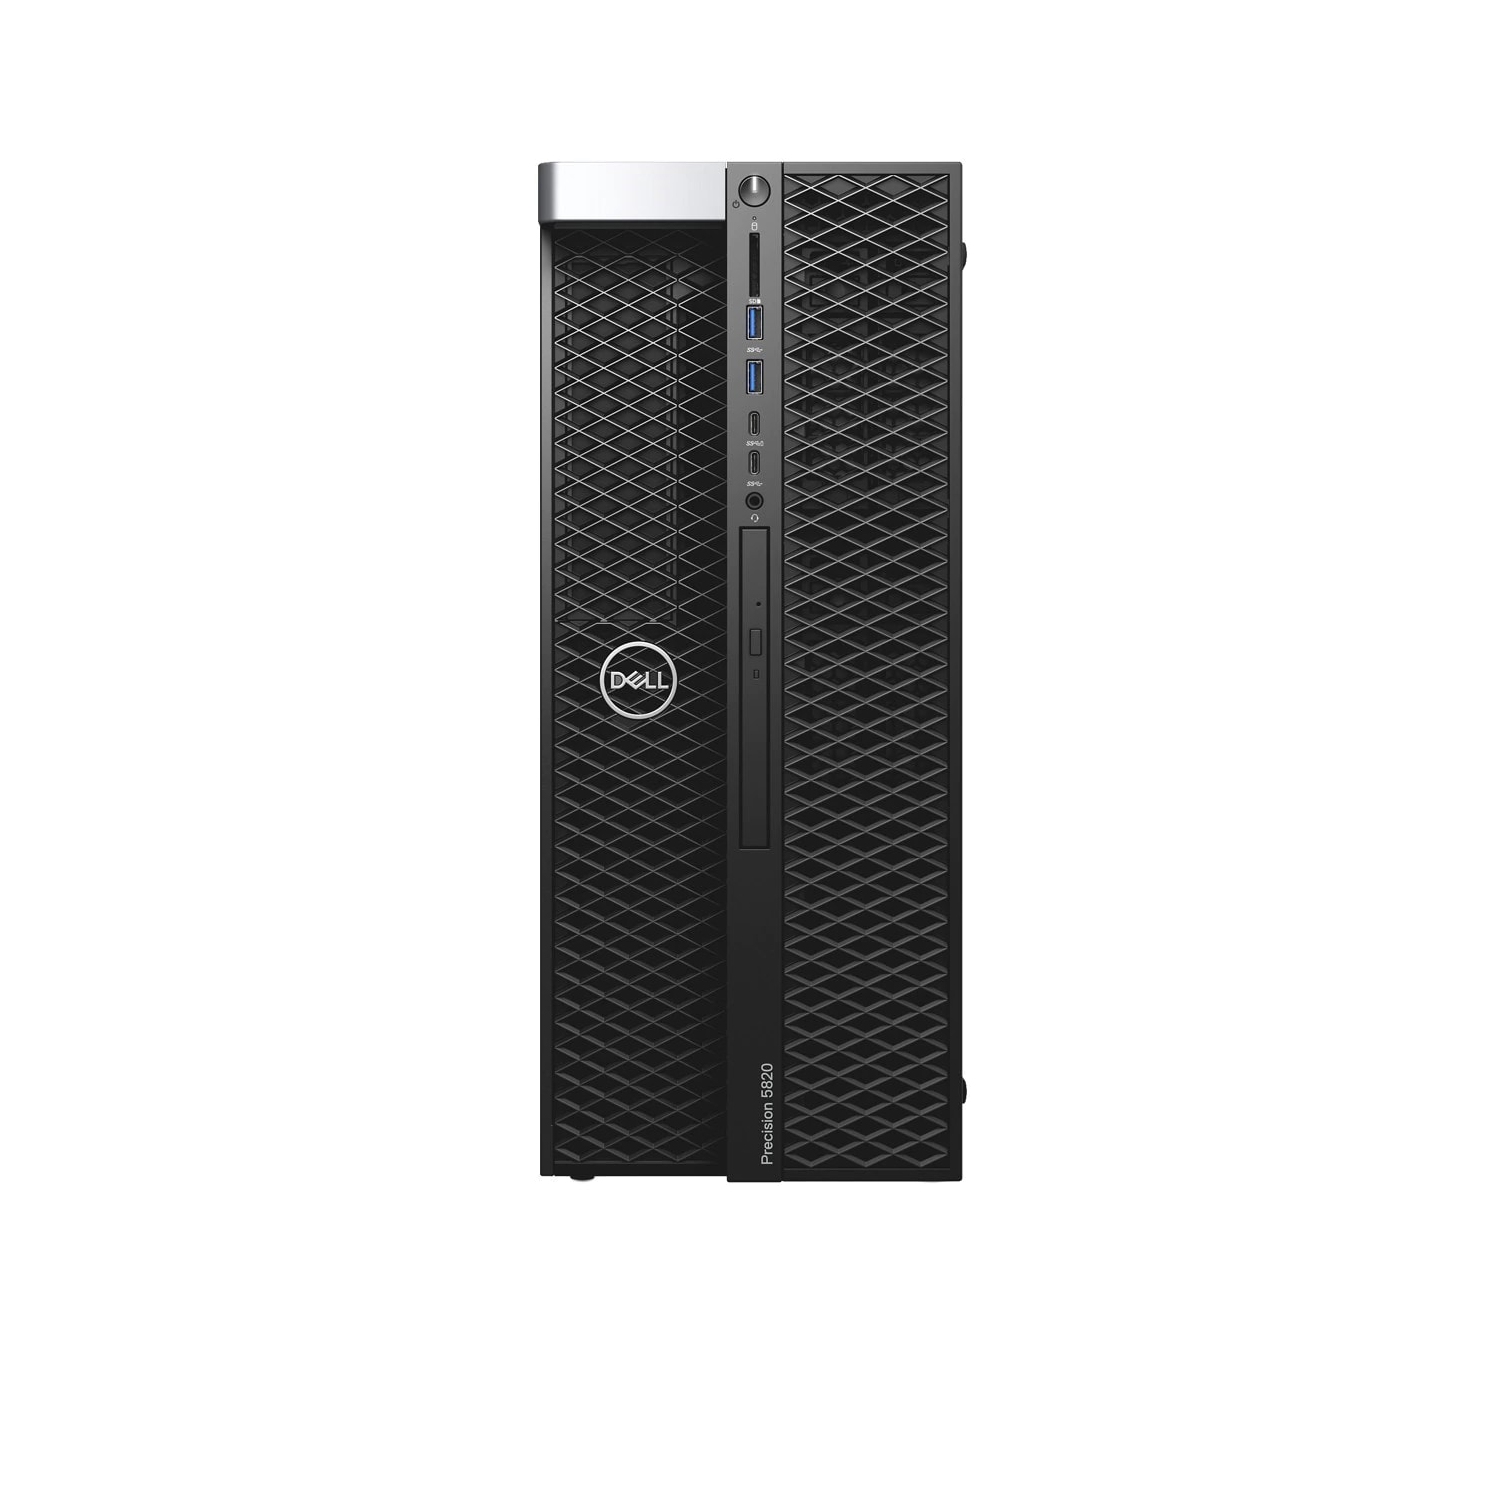 Refurbished (Excellent) - Dell Precision T5820 Workstation Desktop (2018) | Core Xeon W - 1TB SSD - 32GB RAM - RTX 4000 | 4 Cores @ 3.9 GHz Certified Refurbished